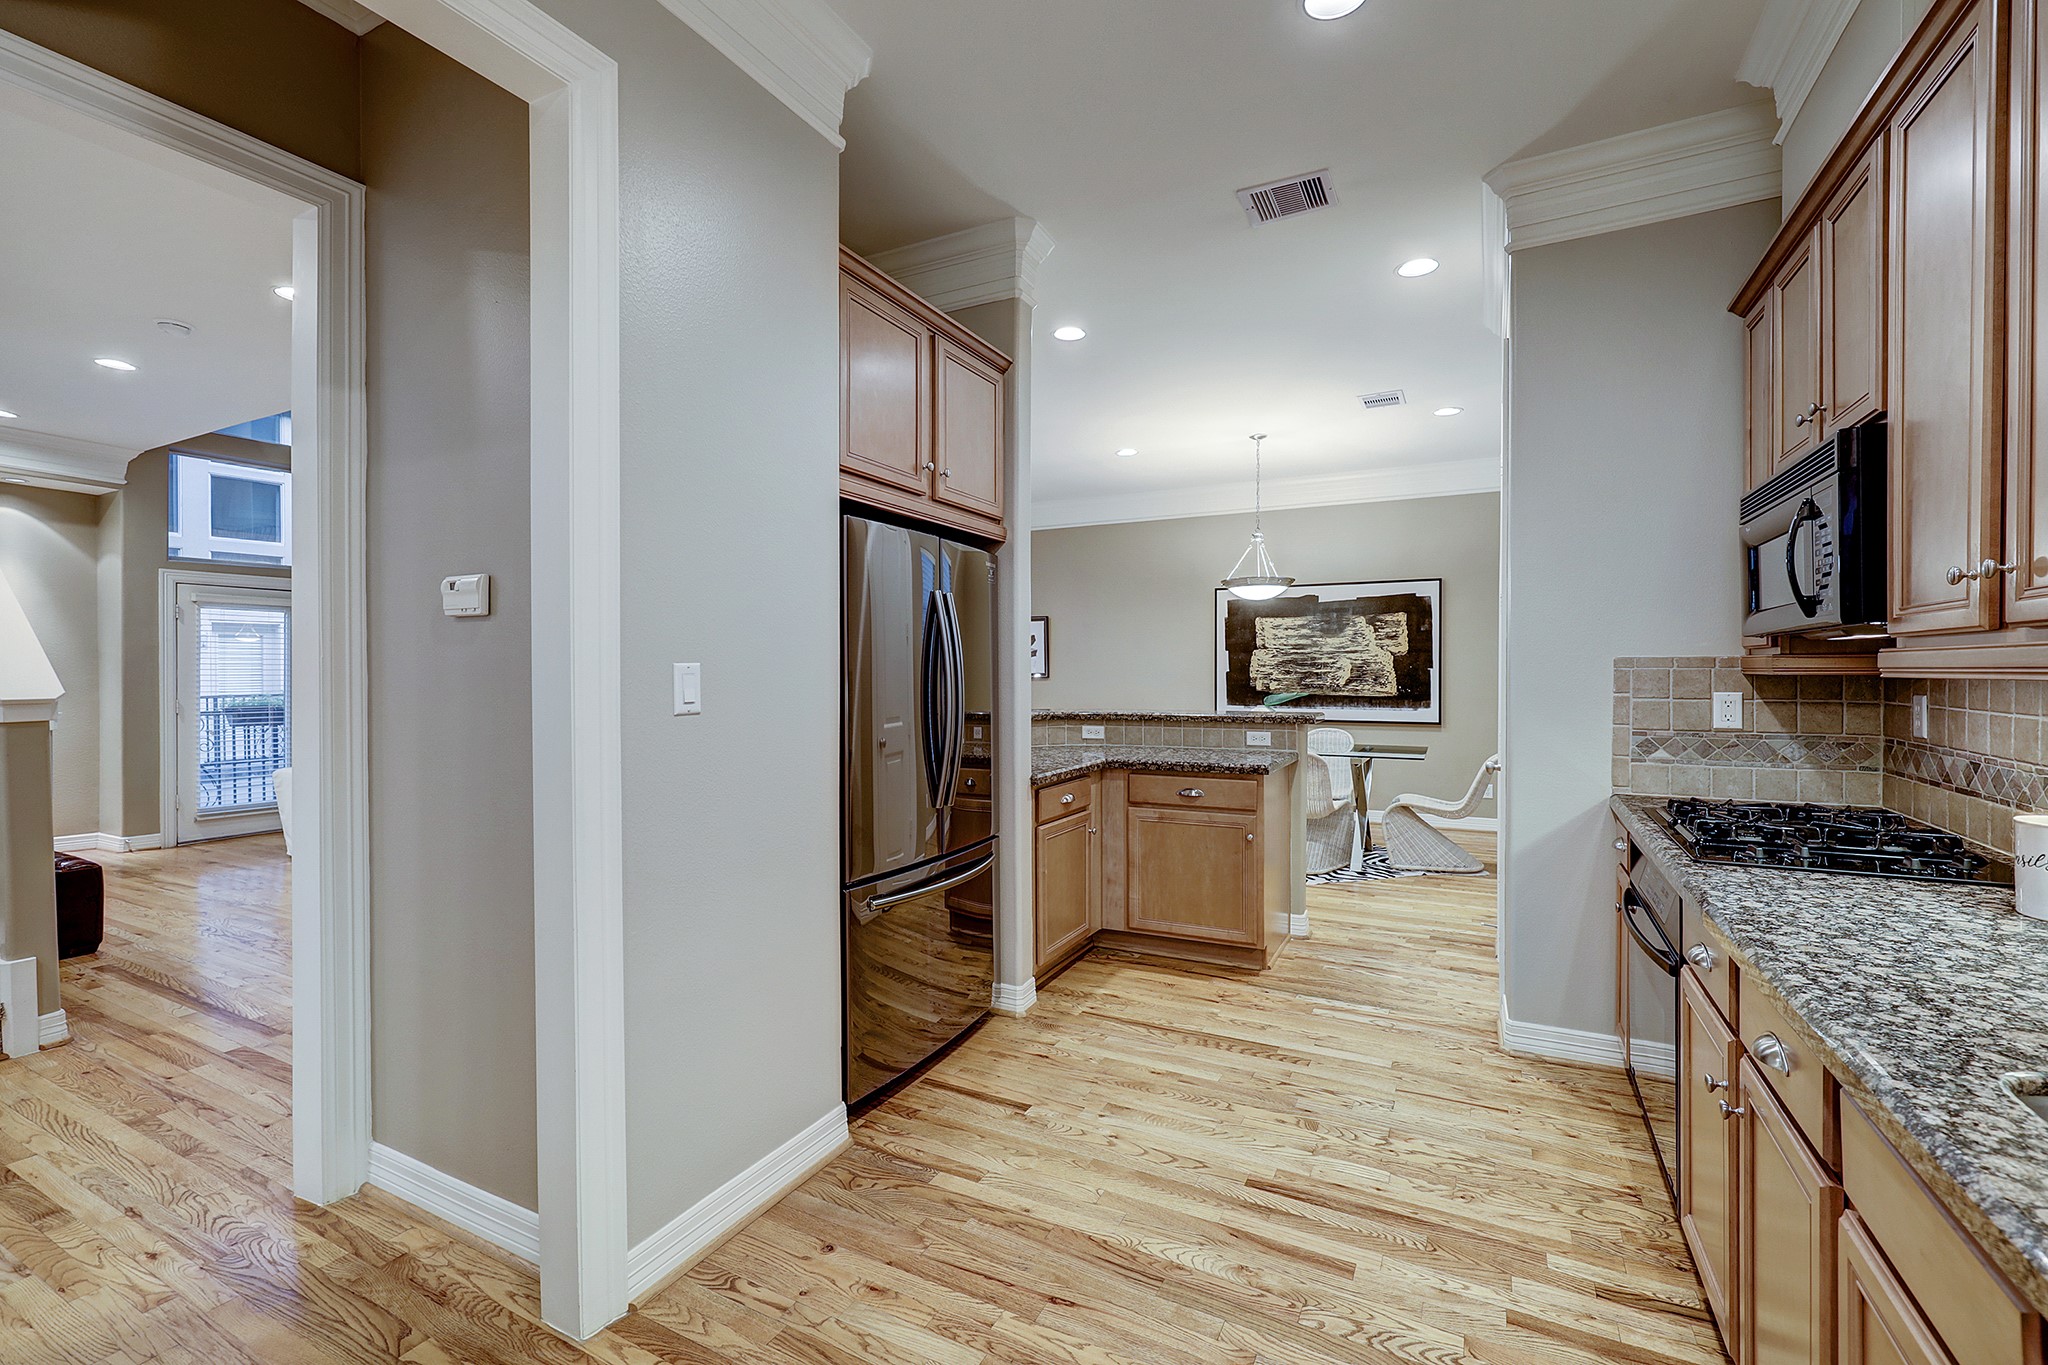 The kitchen is complete with ample storage.